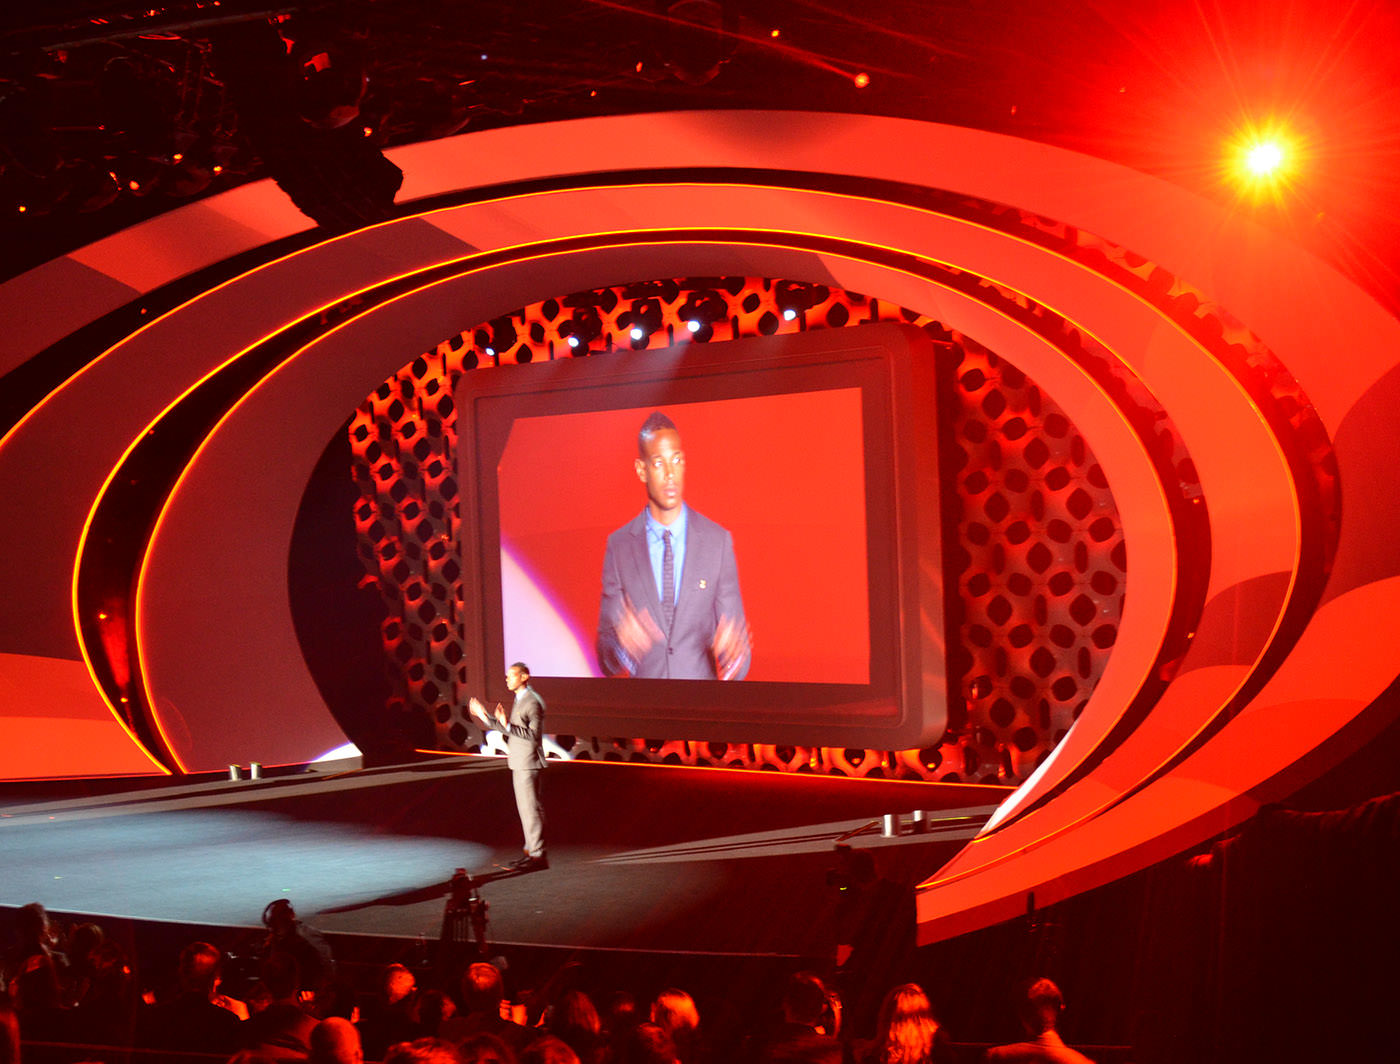 Web on stage at Turner Entertainment Networks Upfront 